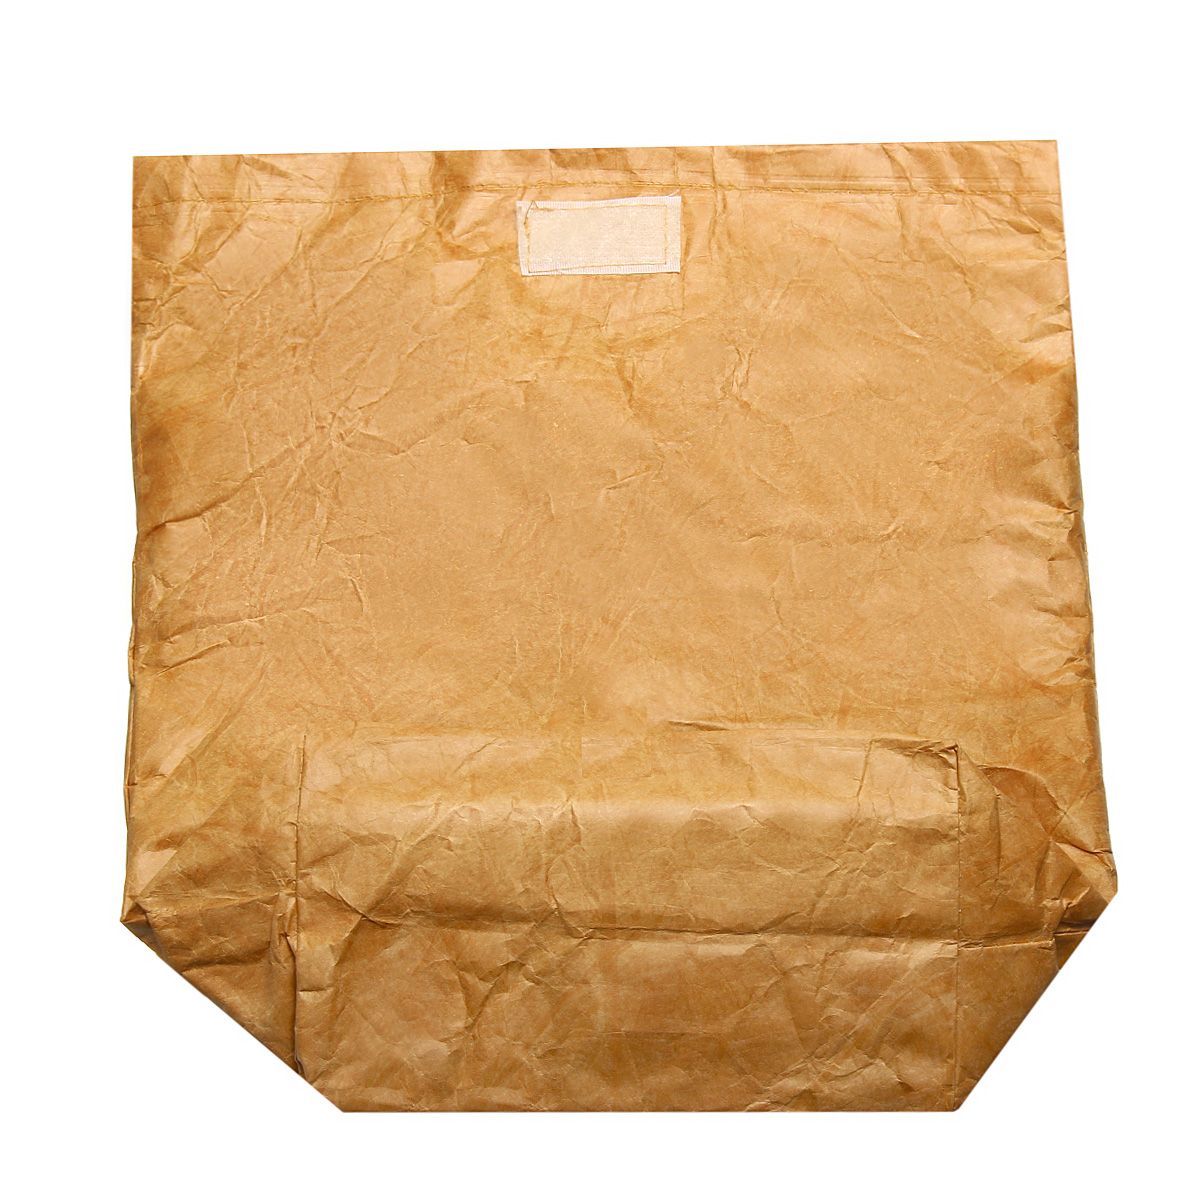 6L-Brown-Kraft-Paper-Lunch-Bag-Reusable-Durable-Insulated-Thermal-Cooler-Bag-1626790